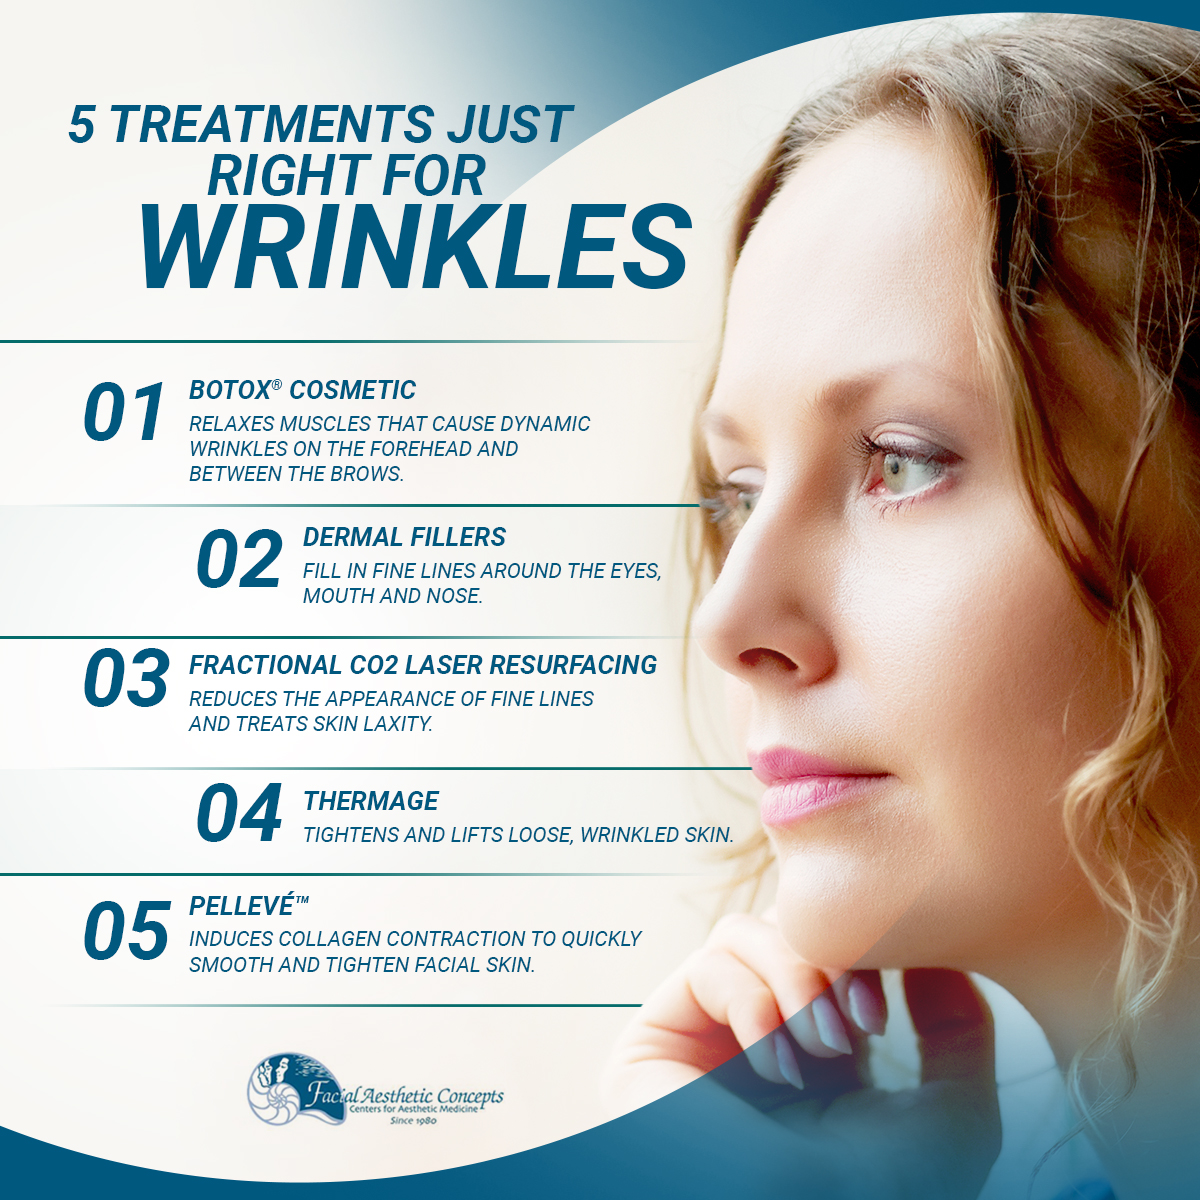 5 Treatments Just Right for Wrinkles [Infographic] img 1